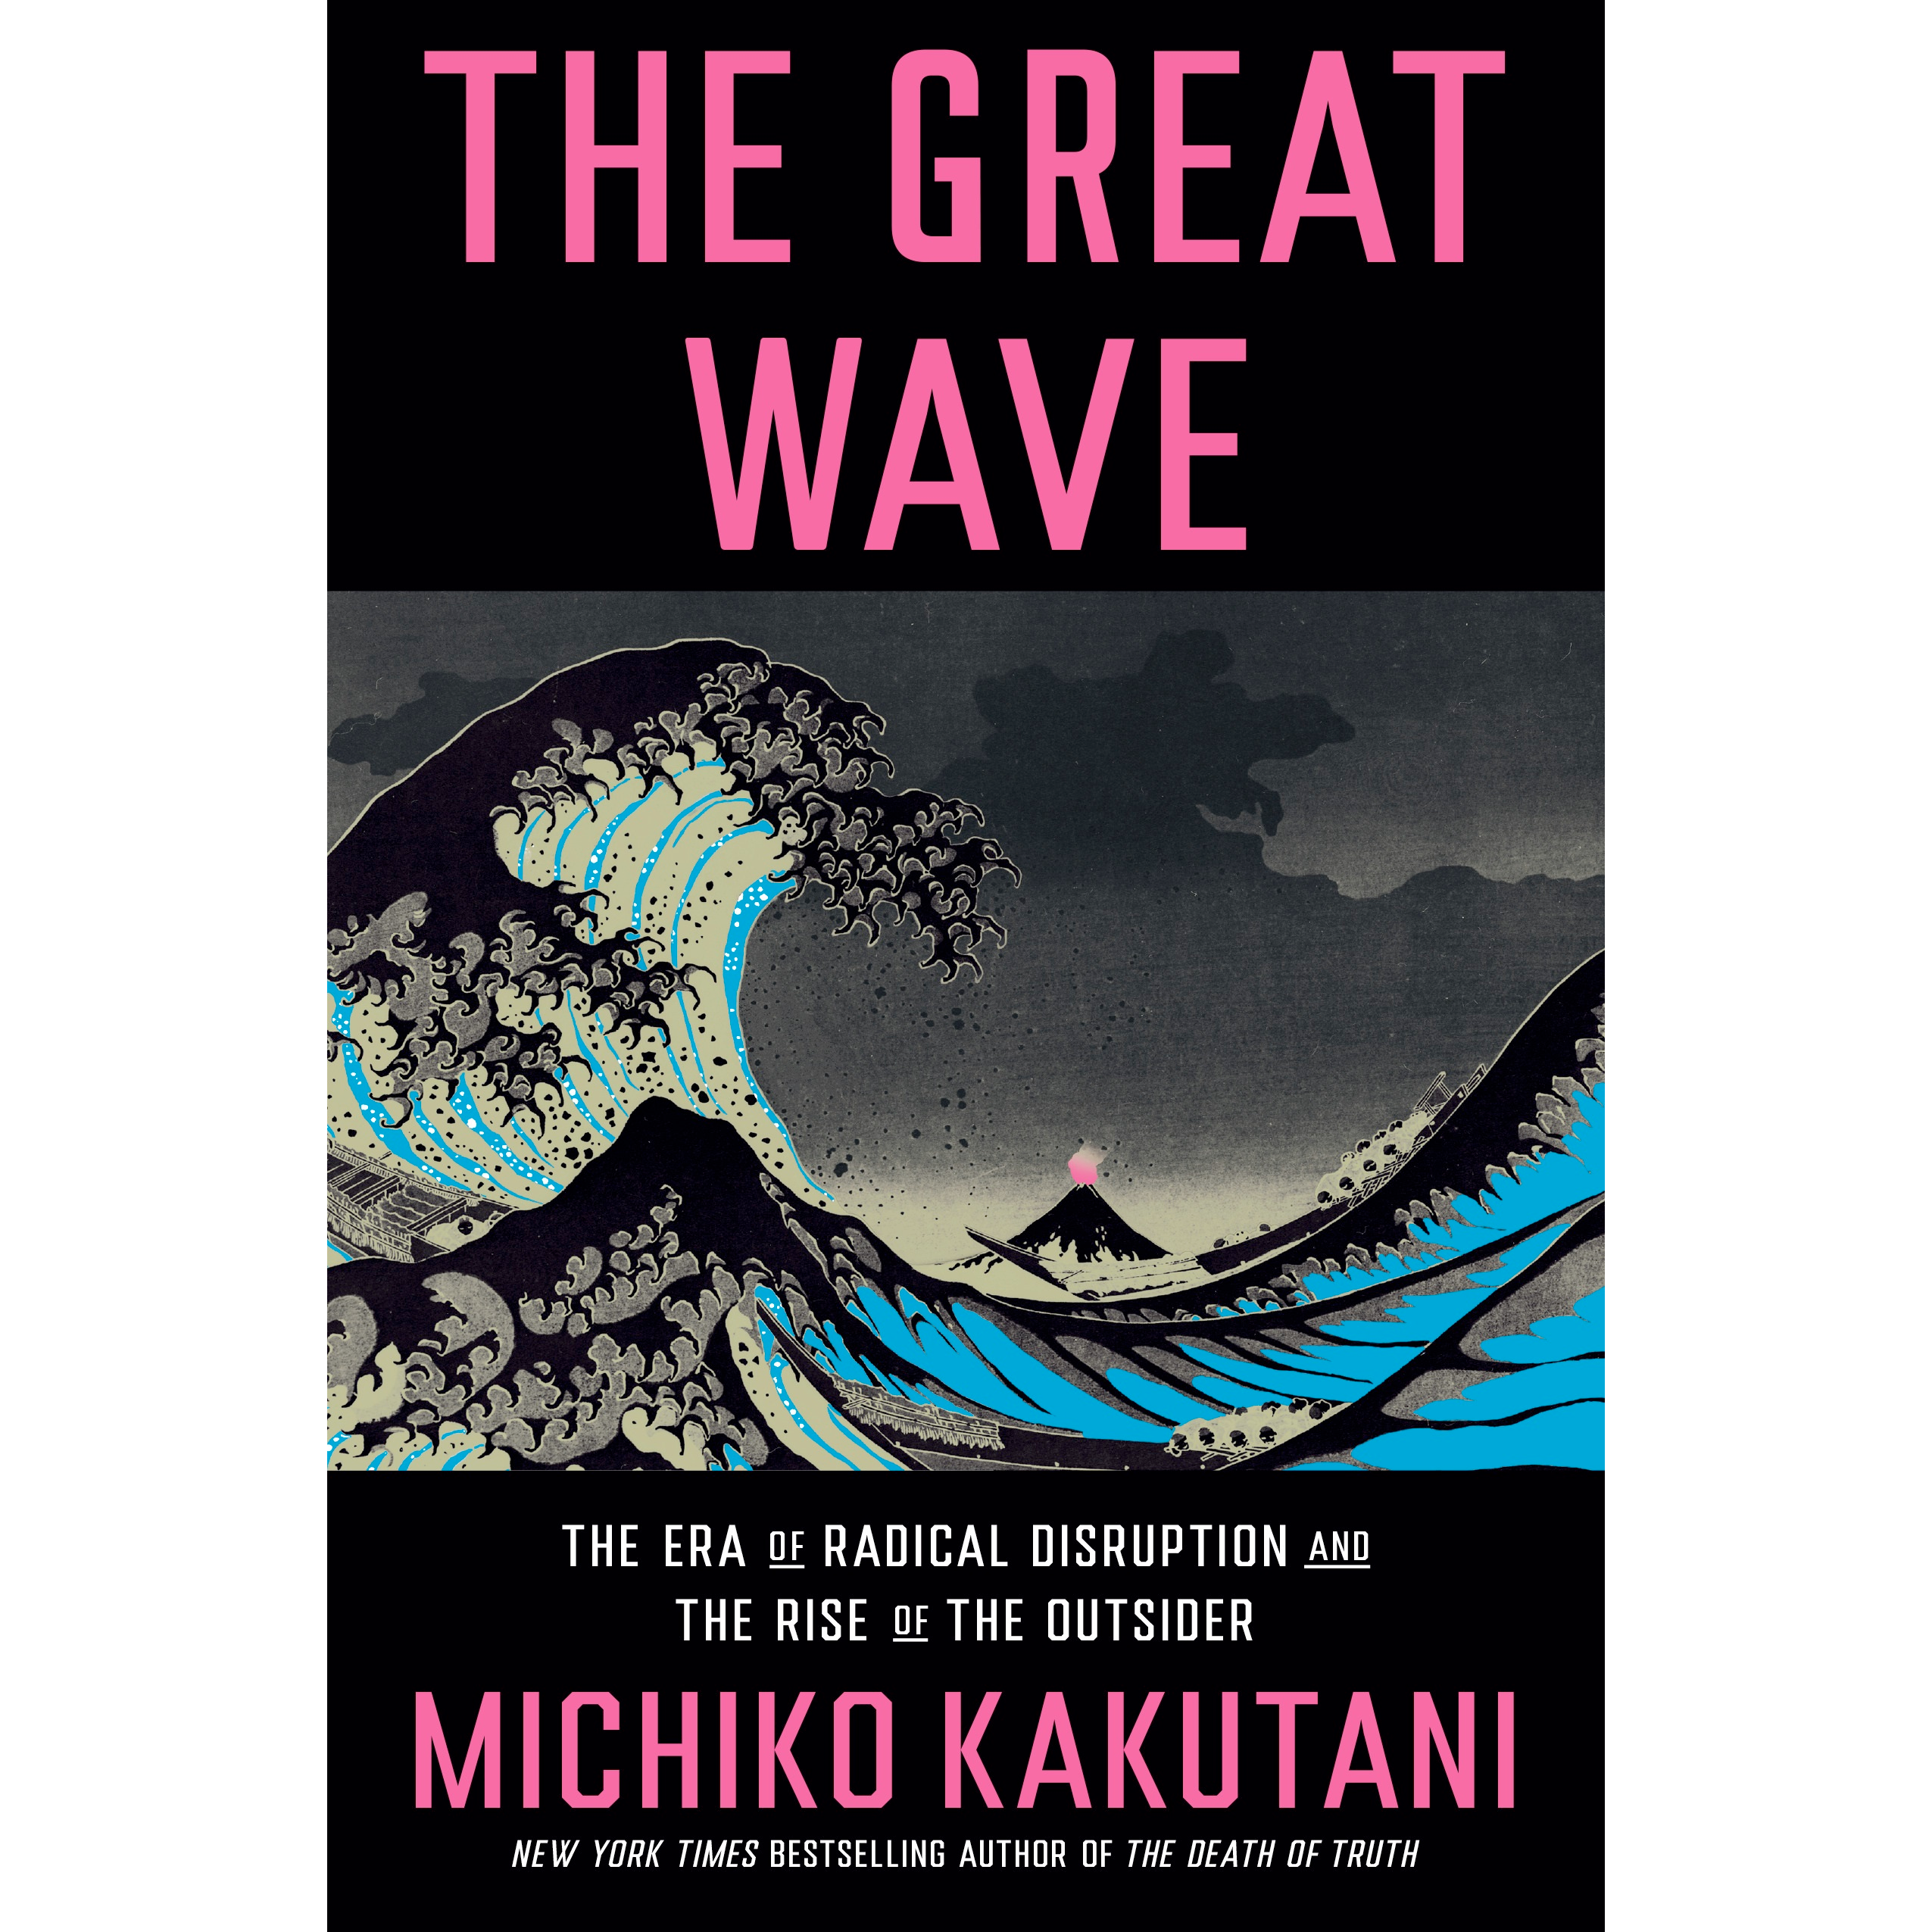 The cover of The Great Wave.